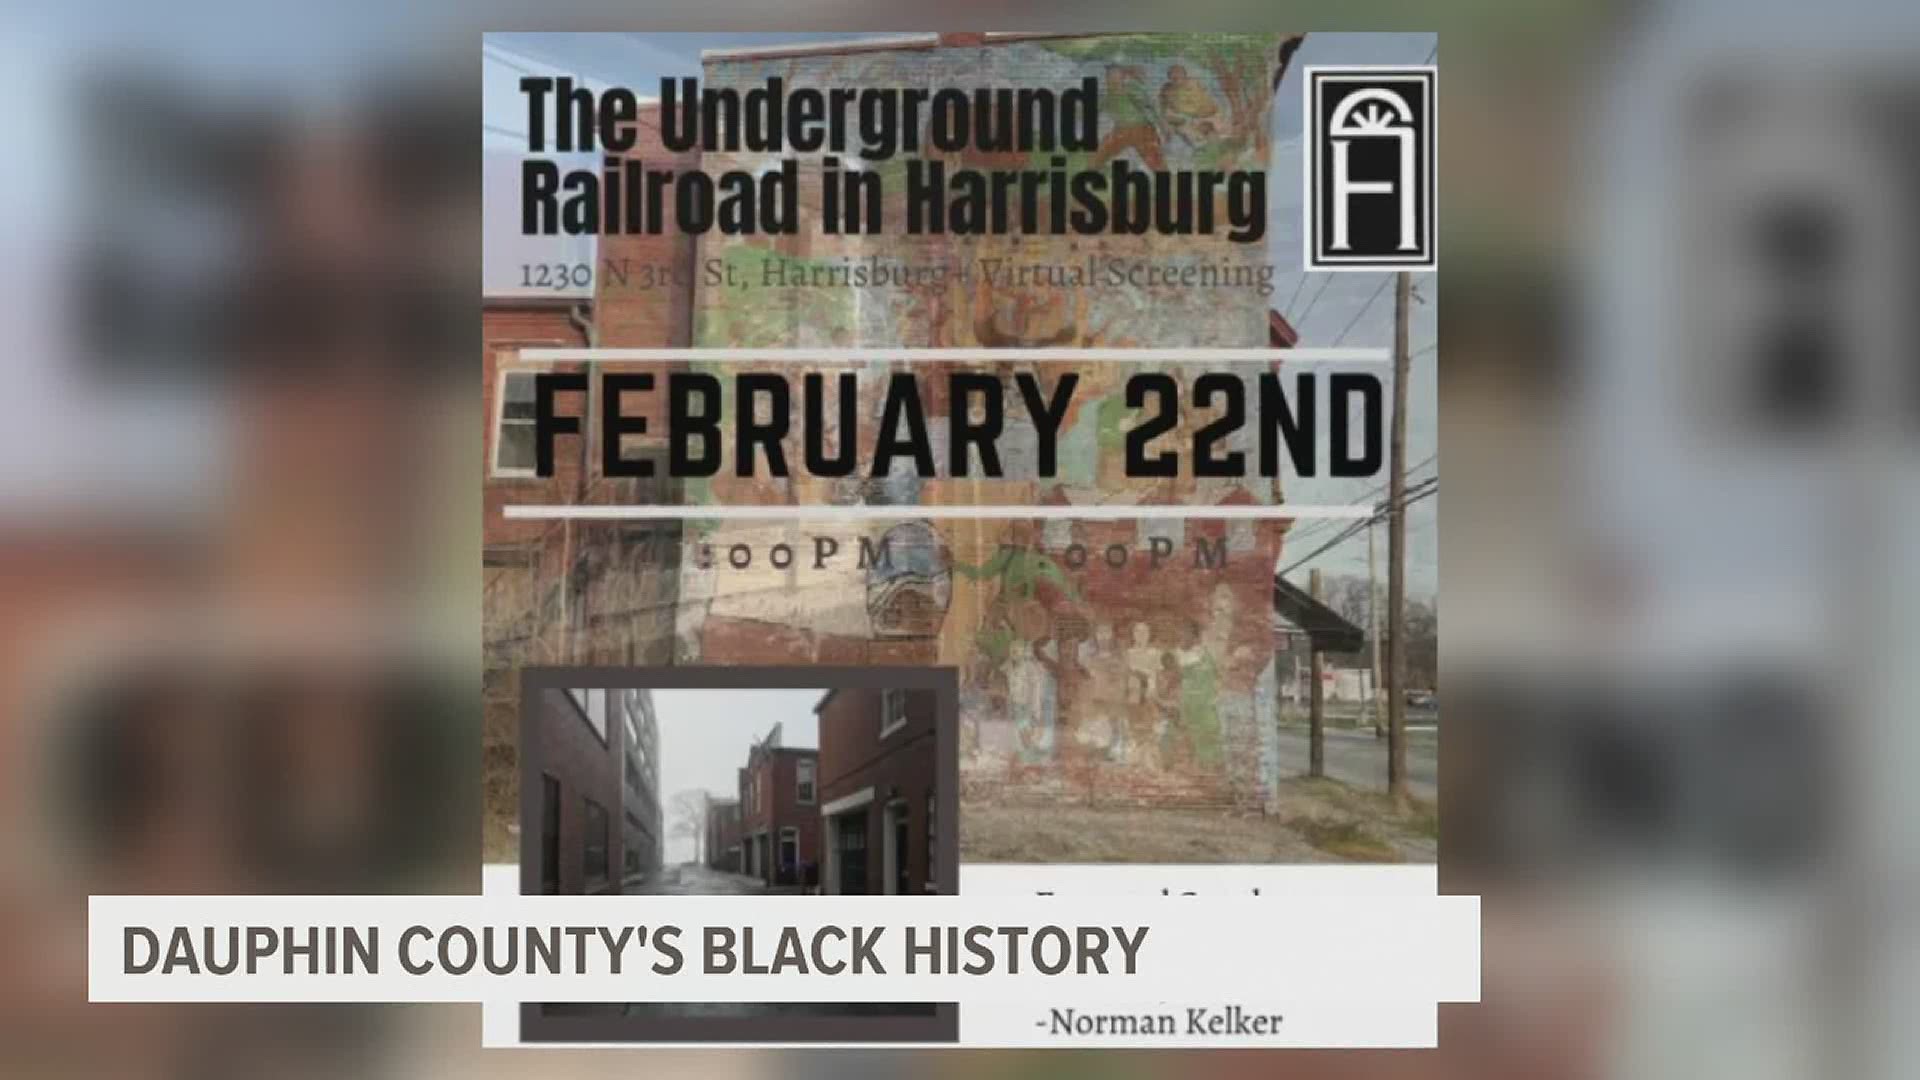 The Historic Harrisburg Association hosted a virtual discussion on Monday to dive into the history of the Underground Railroad in Dauphin County.